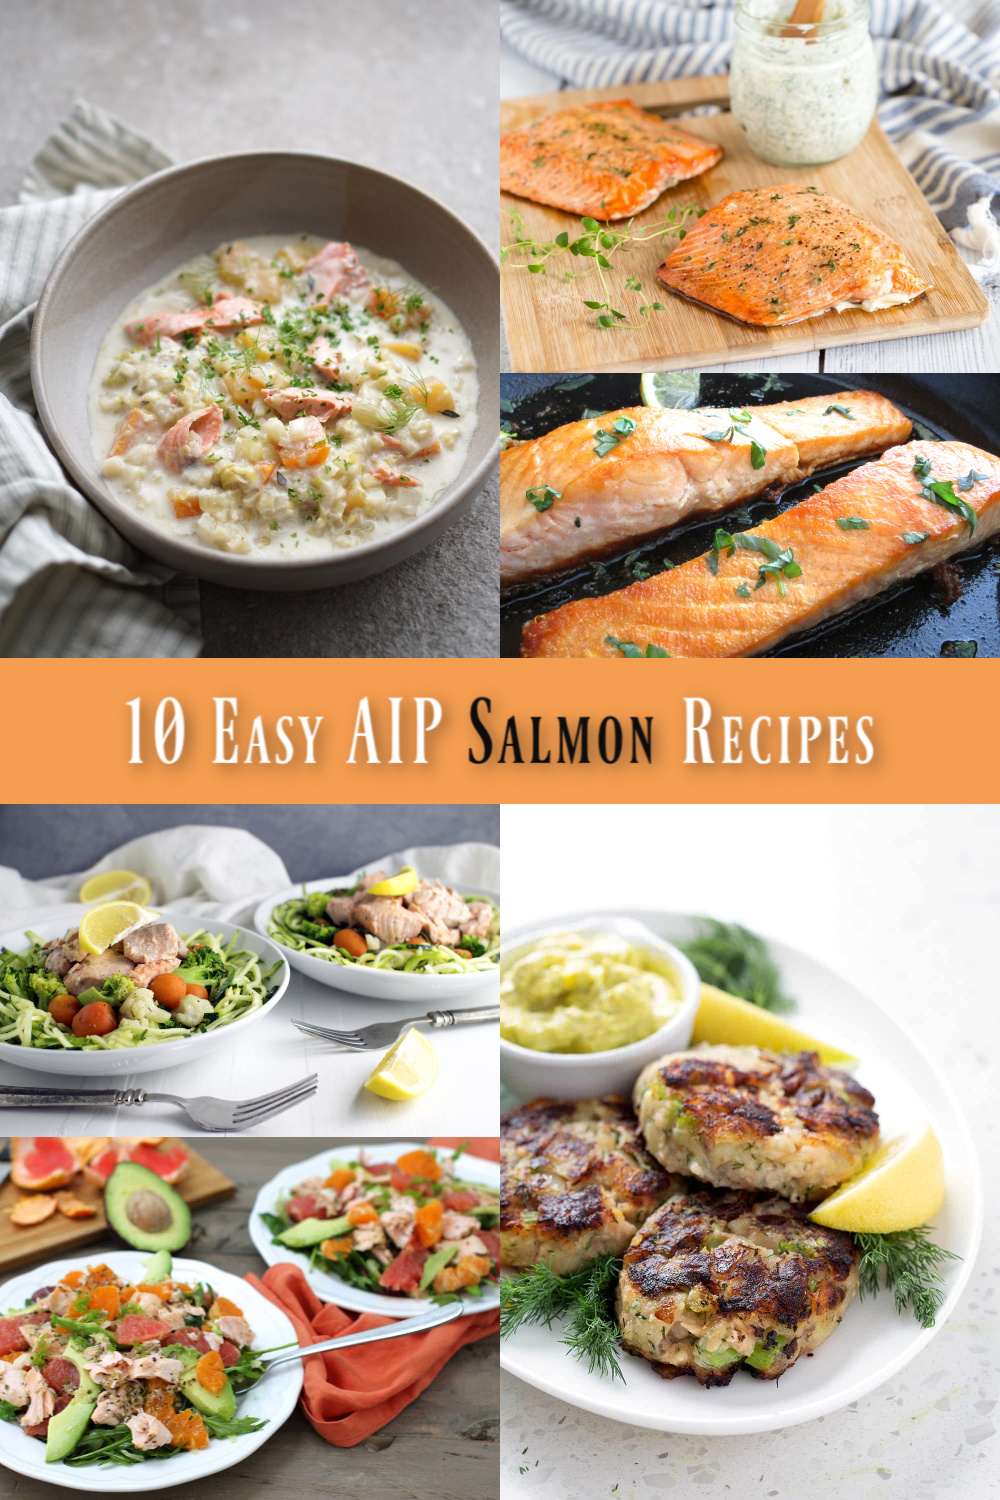 10 More Easy AIP Salmon Recipes - Gutsy By Nature